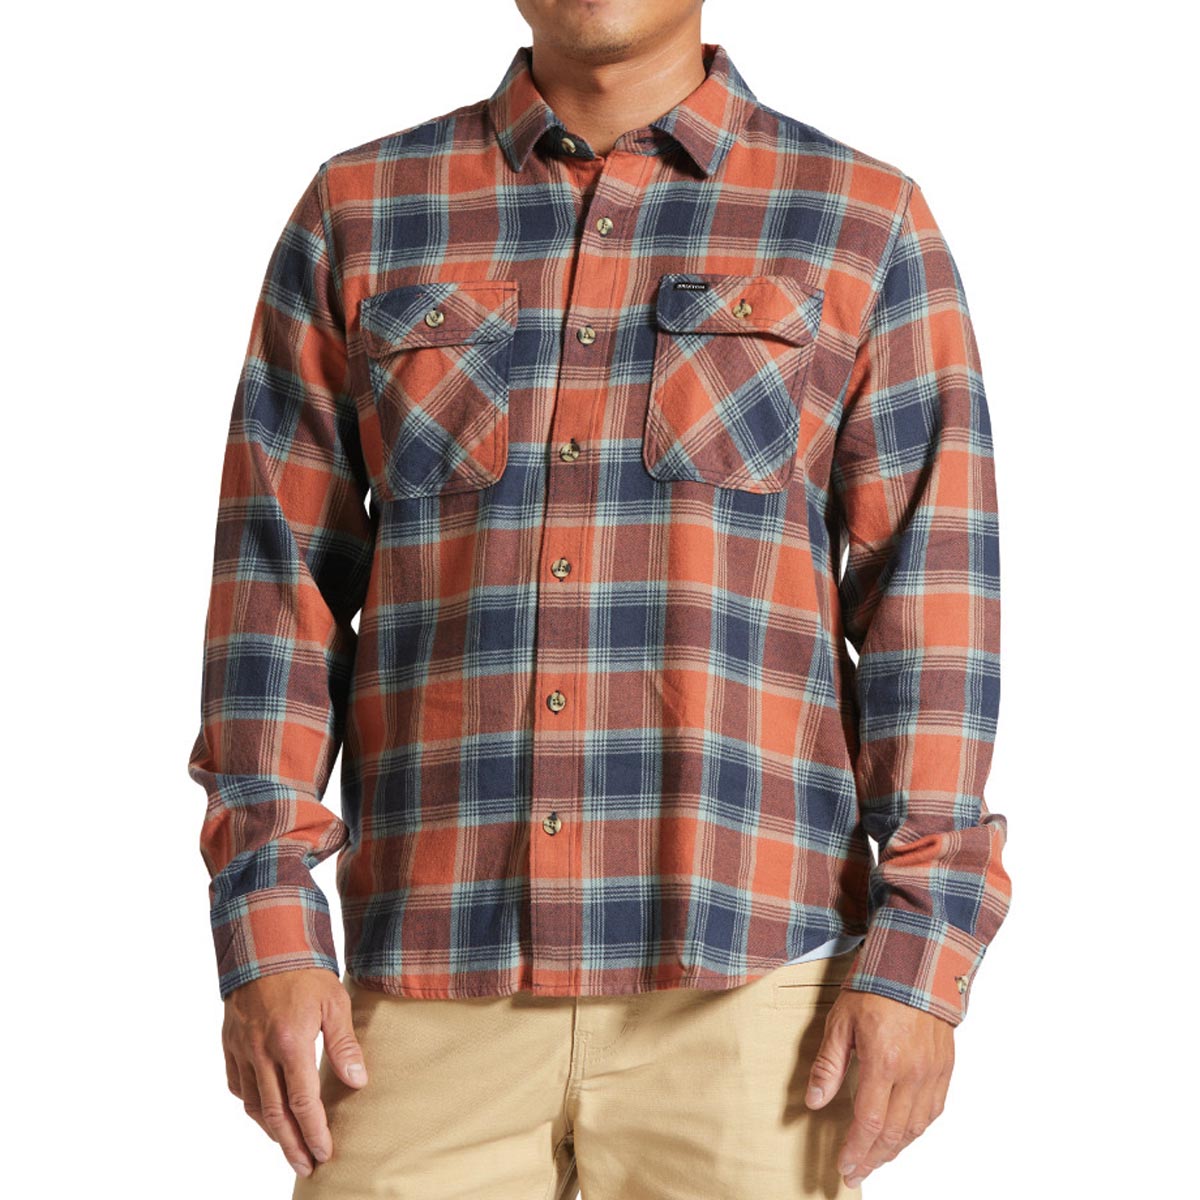 Brixton Bowery Lw Ultra Flannel Shirt - Terracotta/Chinois Green image 1